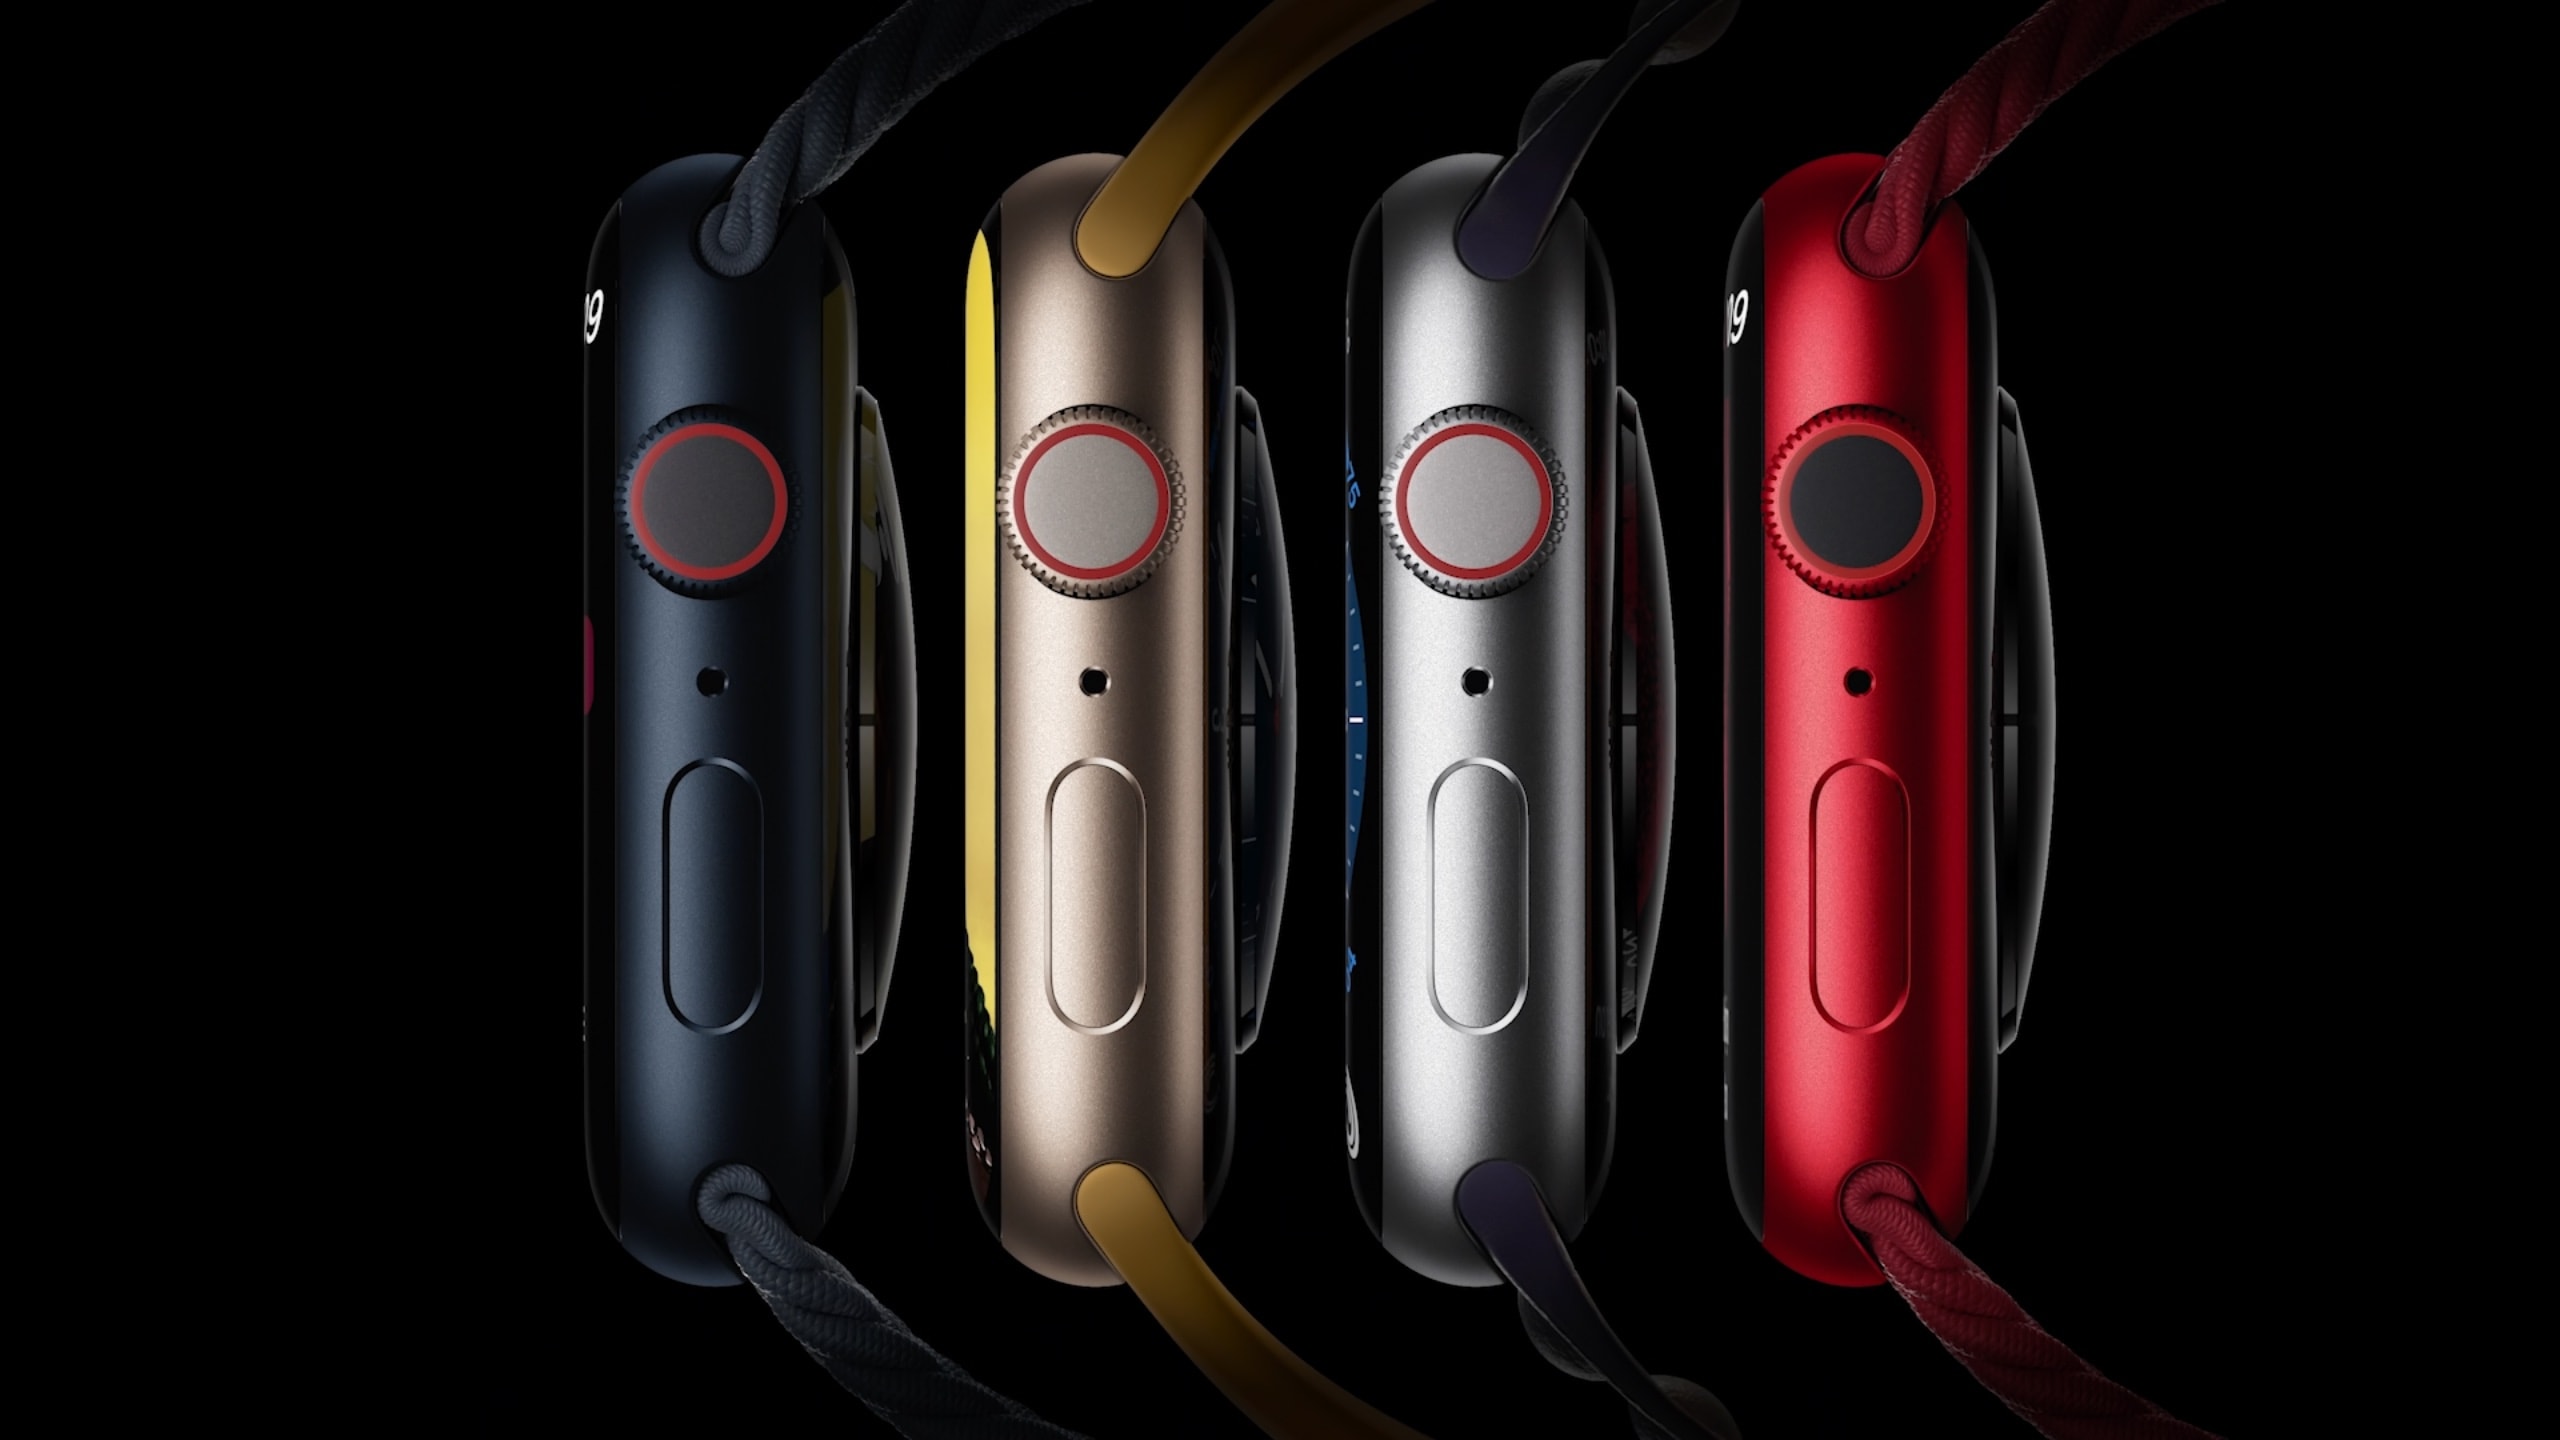 Apple Watch Series 8 will come in 4 colors